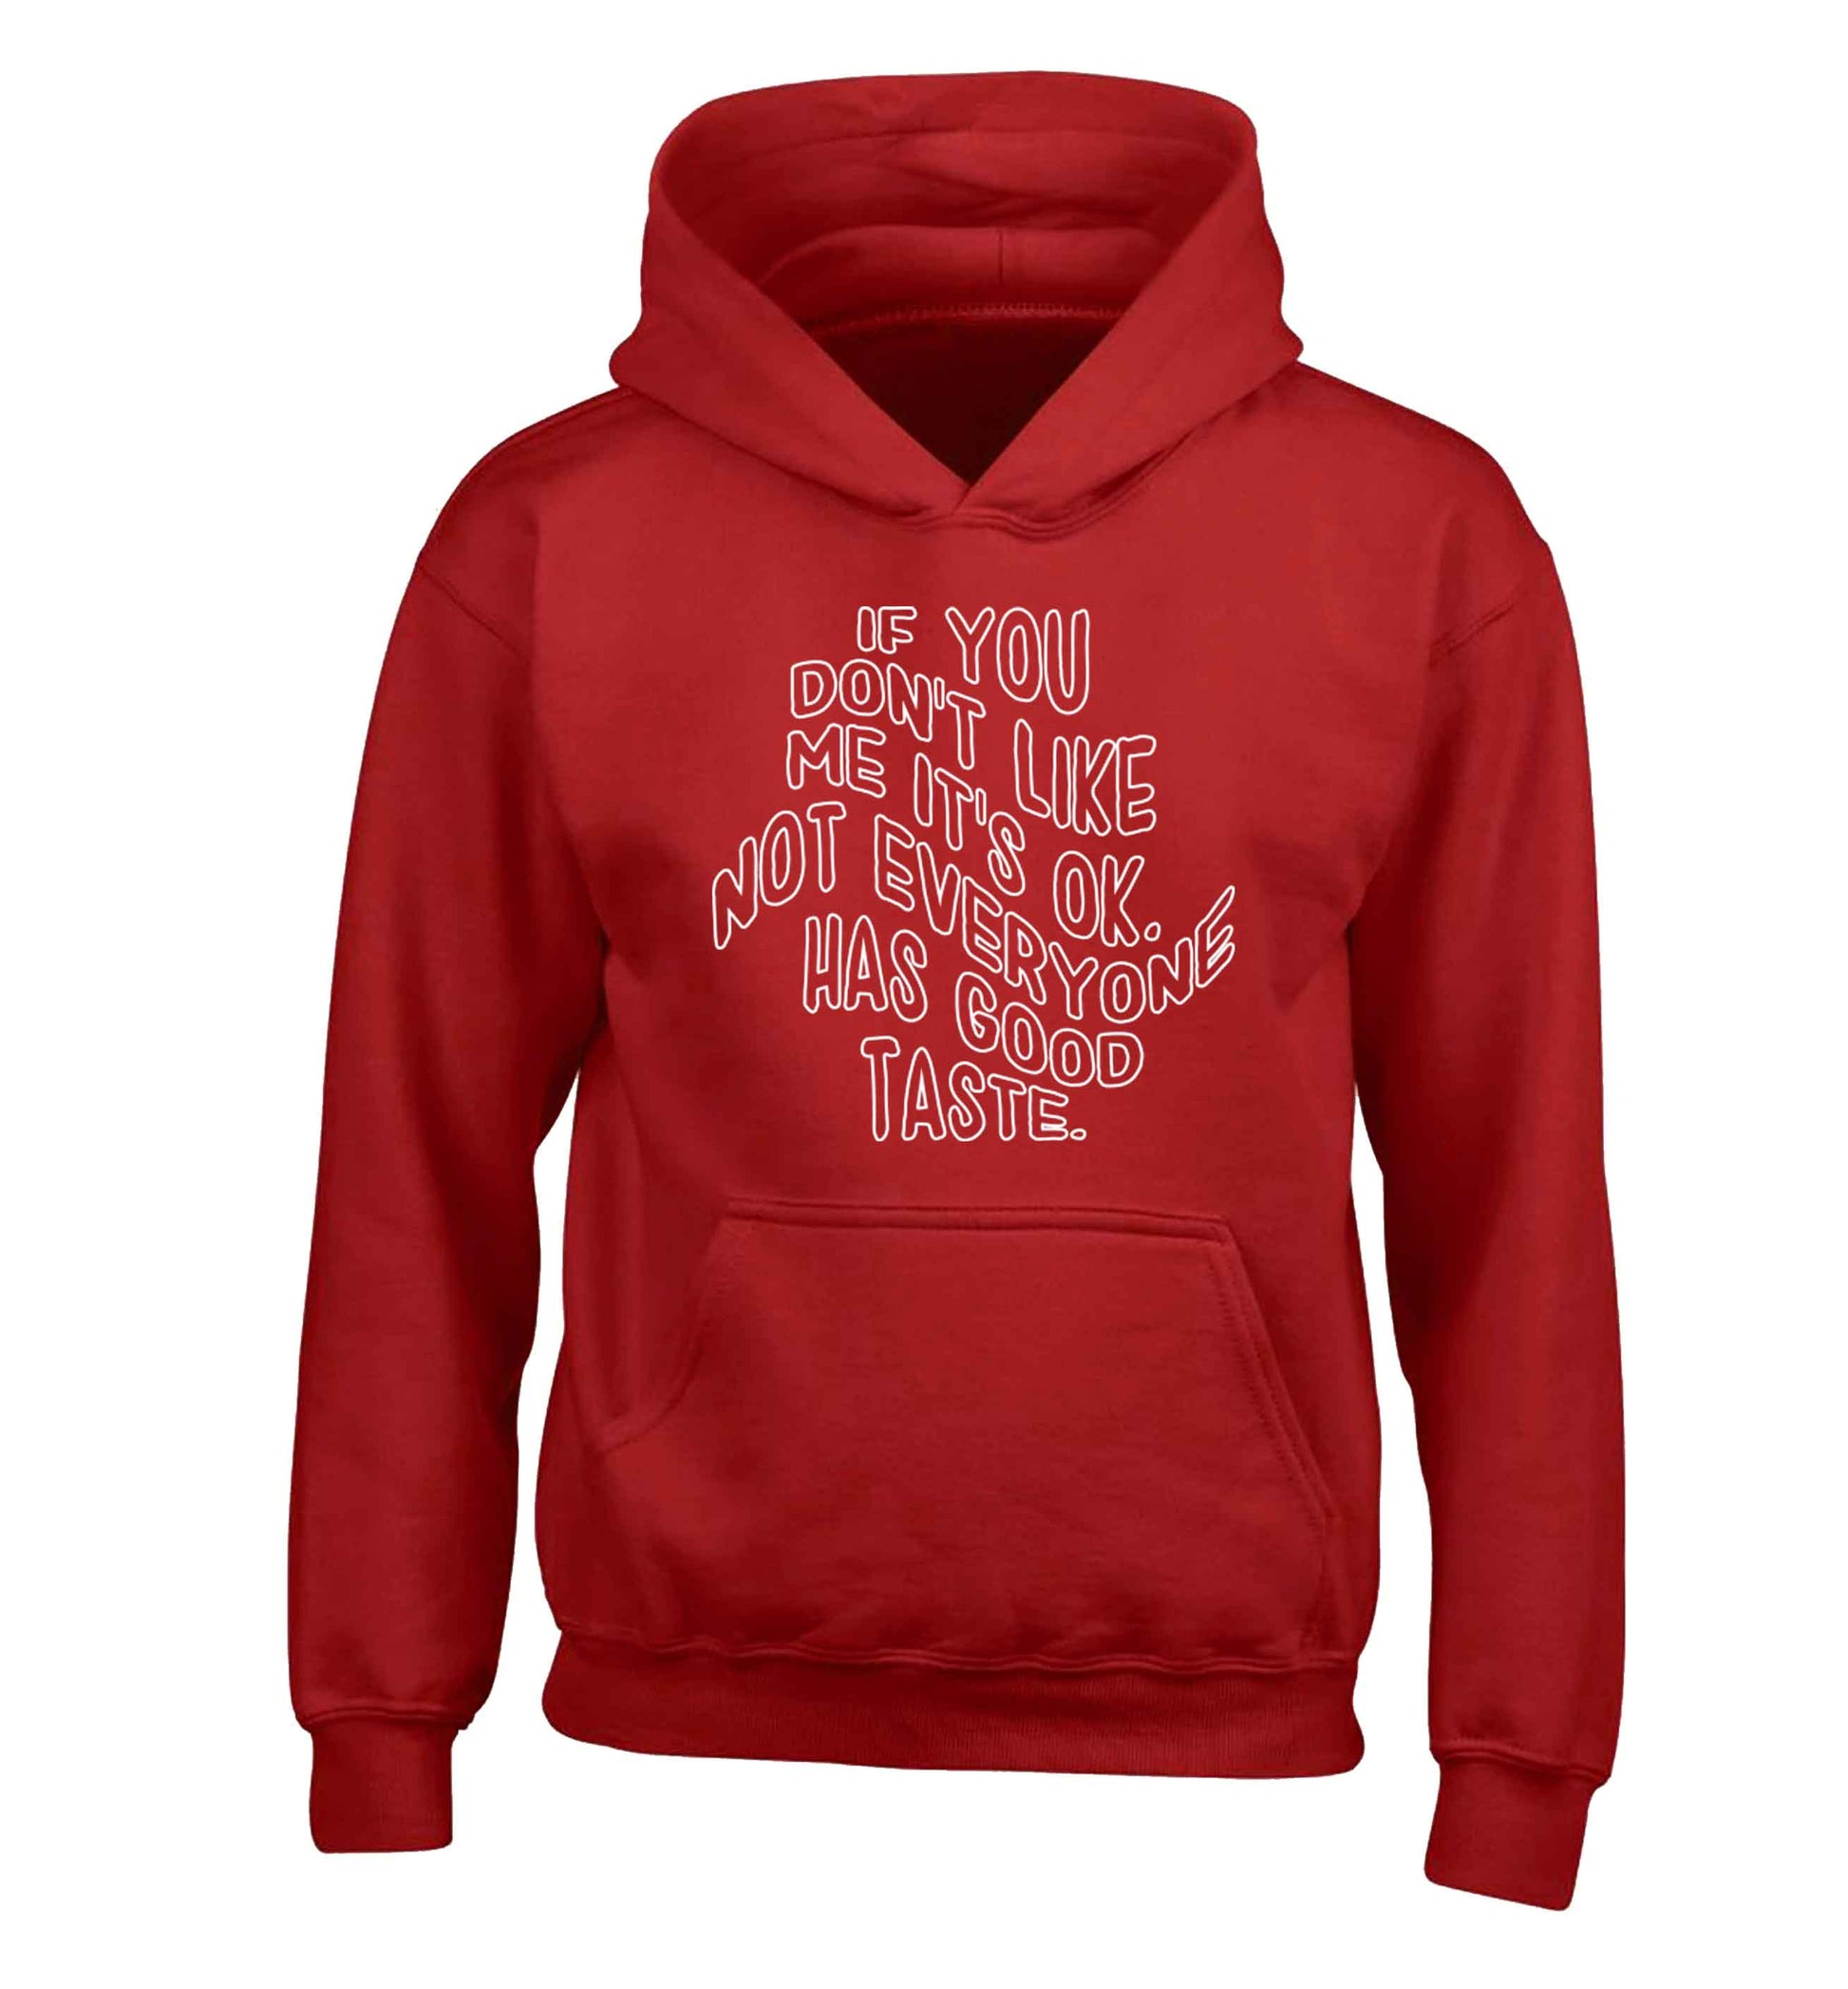 If you don't like me it's ok not everyone has good taste children's red hoodie 12-13 Years